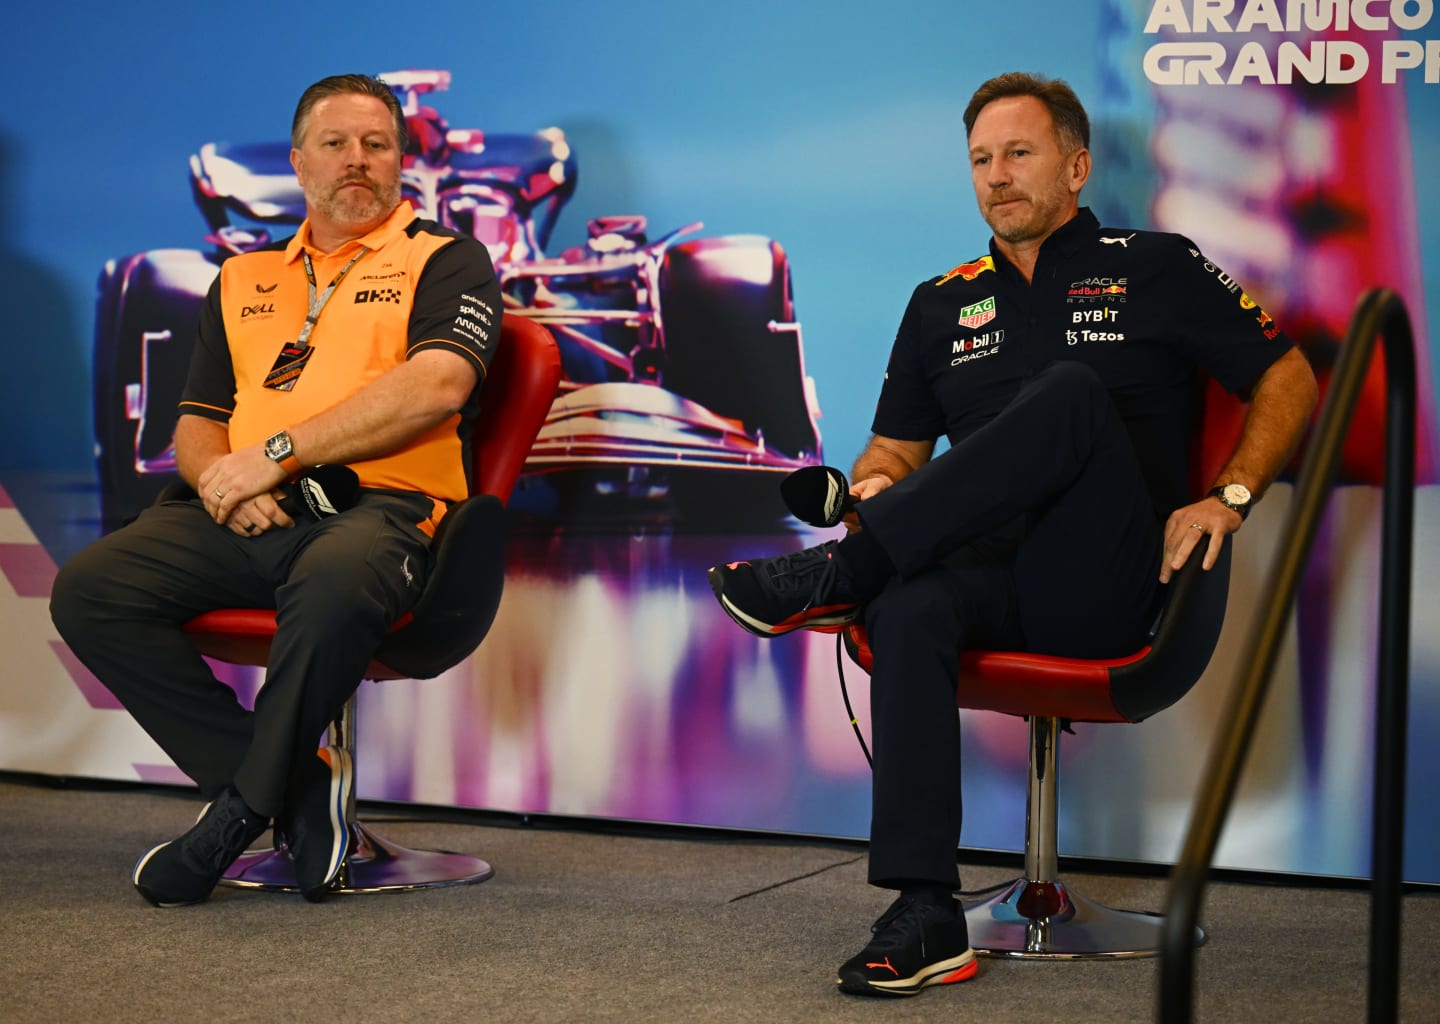 AUSTIN, TEXAS - OCTOBER 22: Red Bull Racing Team Principal Christian Horner and McLaren Chief Executive Officer Zak Brown attend the Team Principals Press Conference prior to final practice ahead of the F1 Grand Prix of USA at Circuit of The Americas on October 22, 2022 in Austin, Texas. (Photo by Clive Mason/Getty Images)